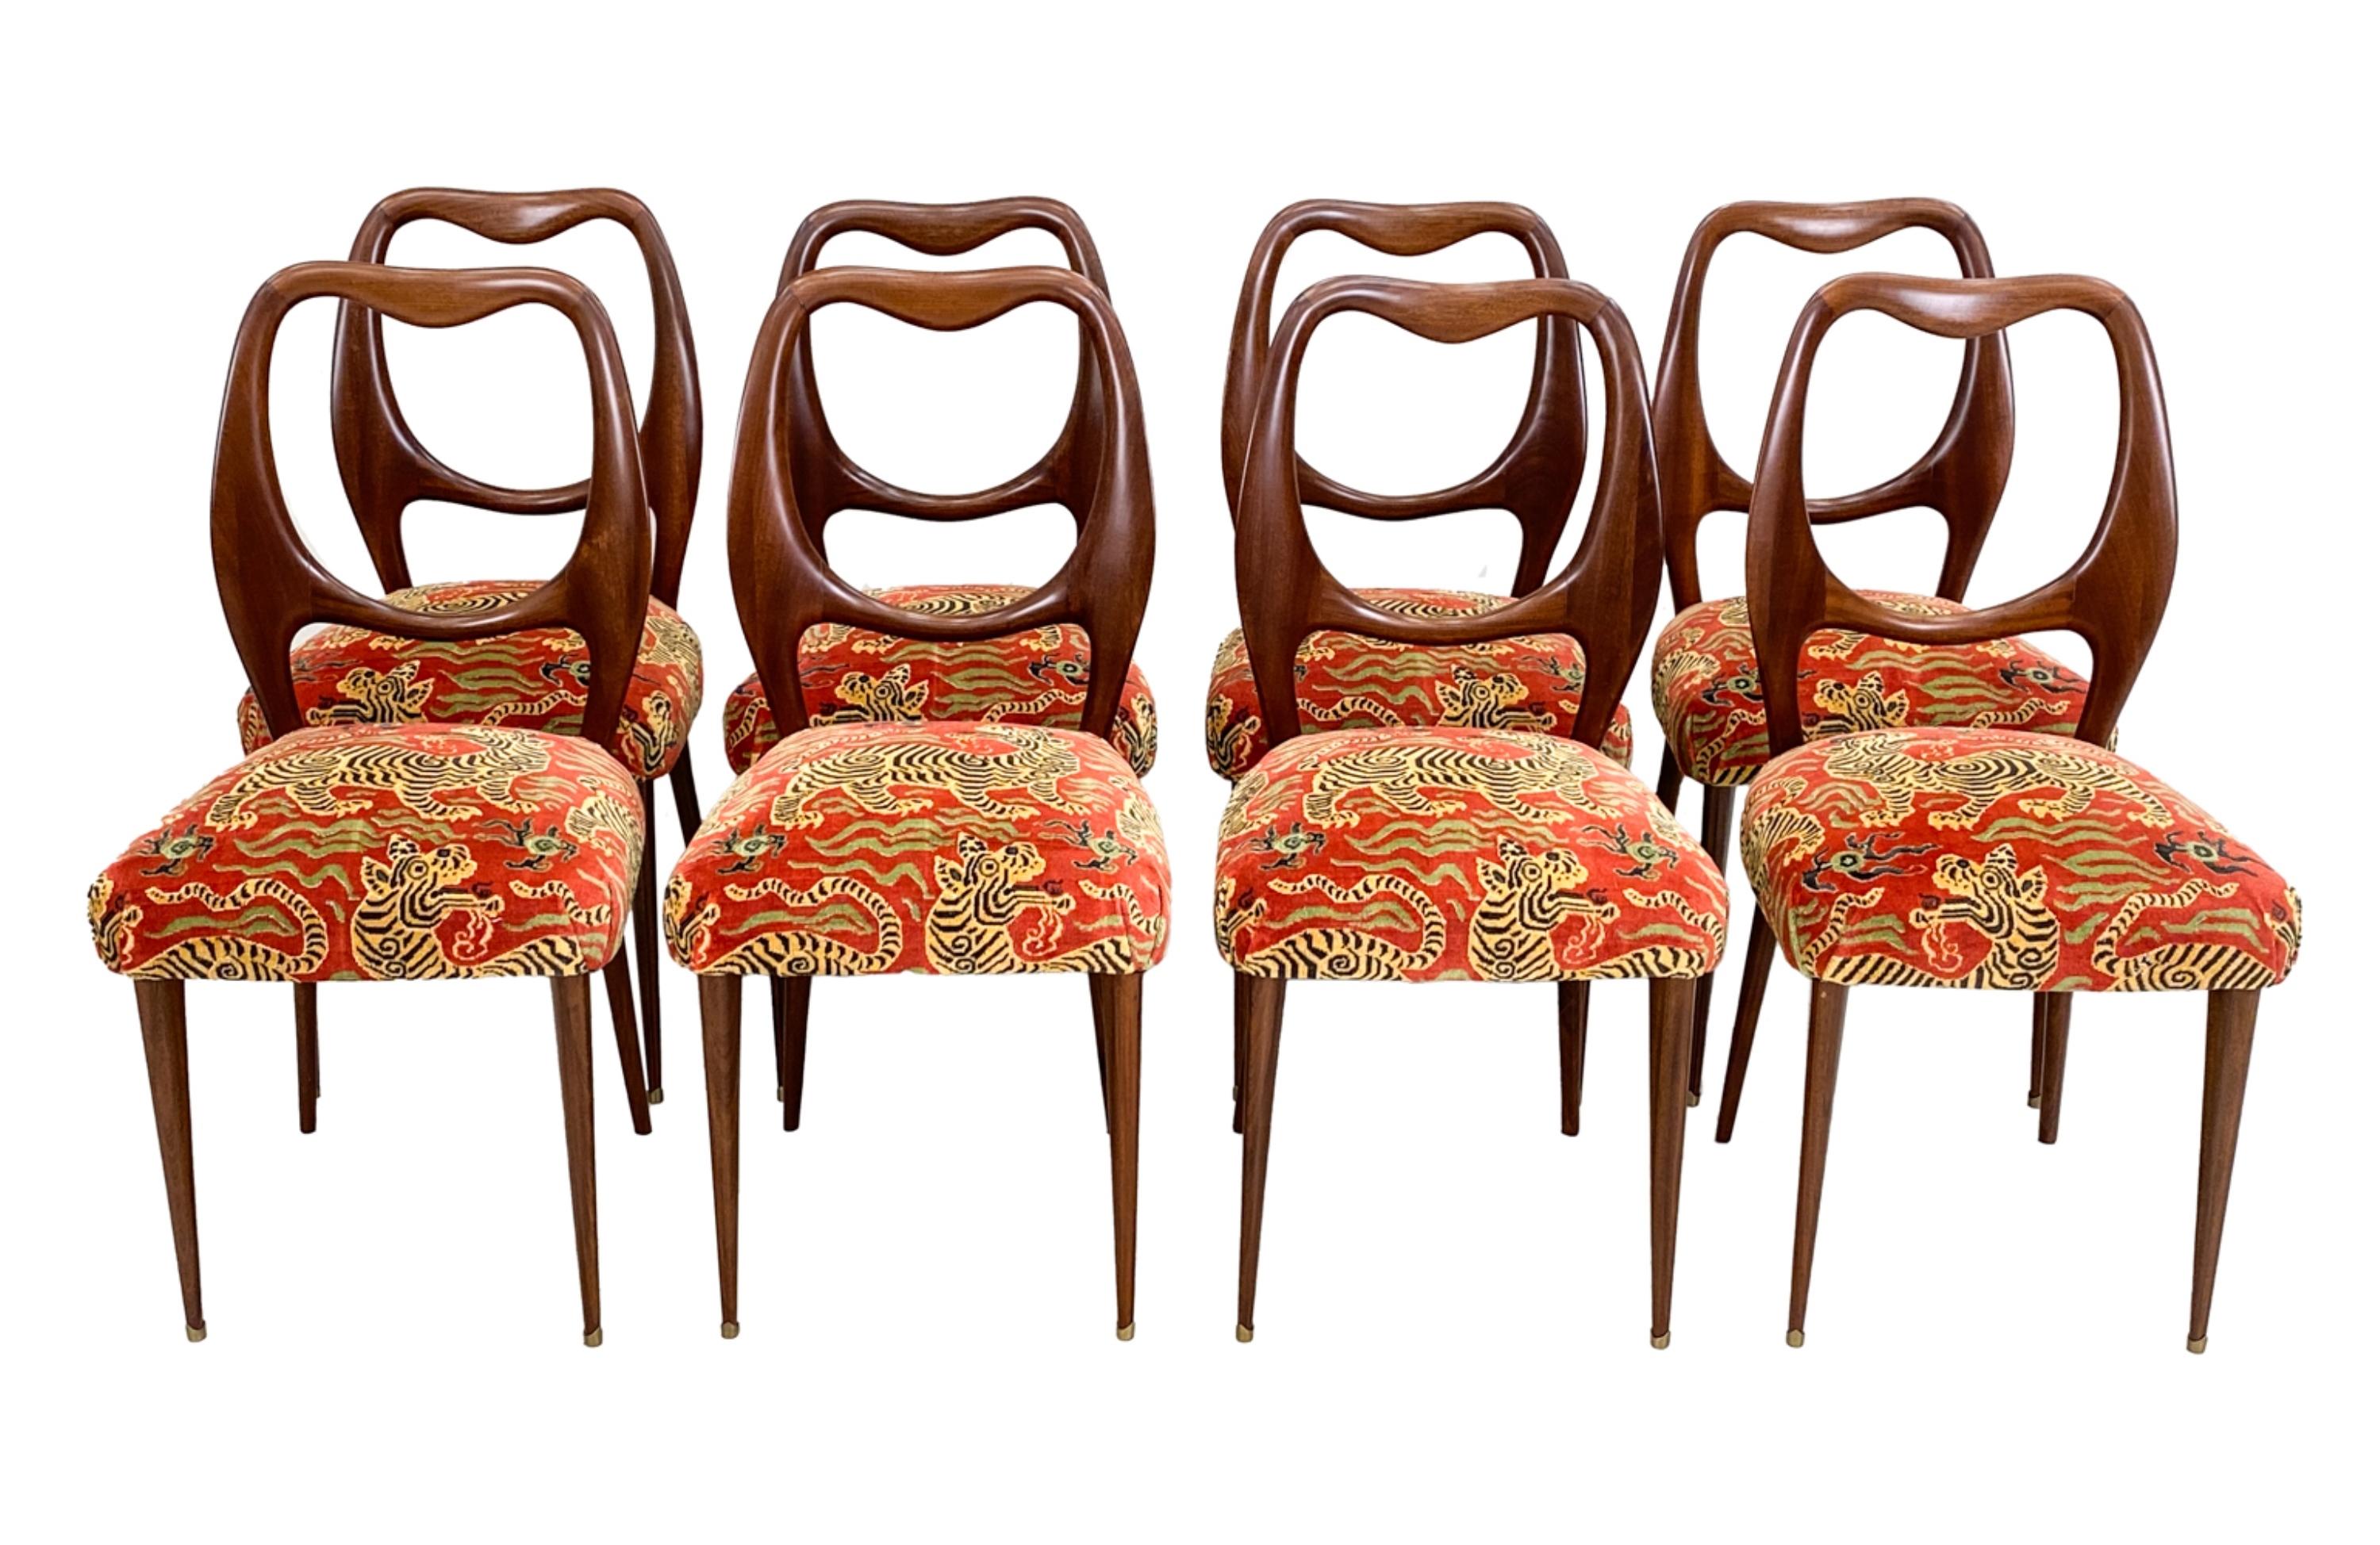 Exquisite sculptural dining chairs designed by Guglielmo Ulrich. Made in Italy. Apparently unmarked. 
Provenance: Purchased with matching table in New York City at Van den Akker for $23,600 in 2006.
 